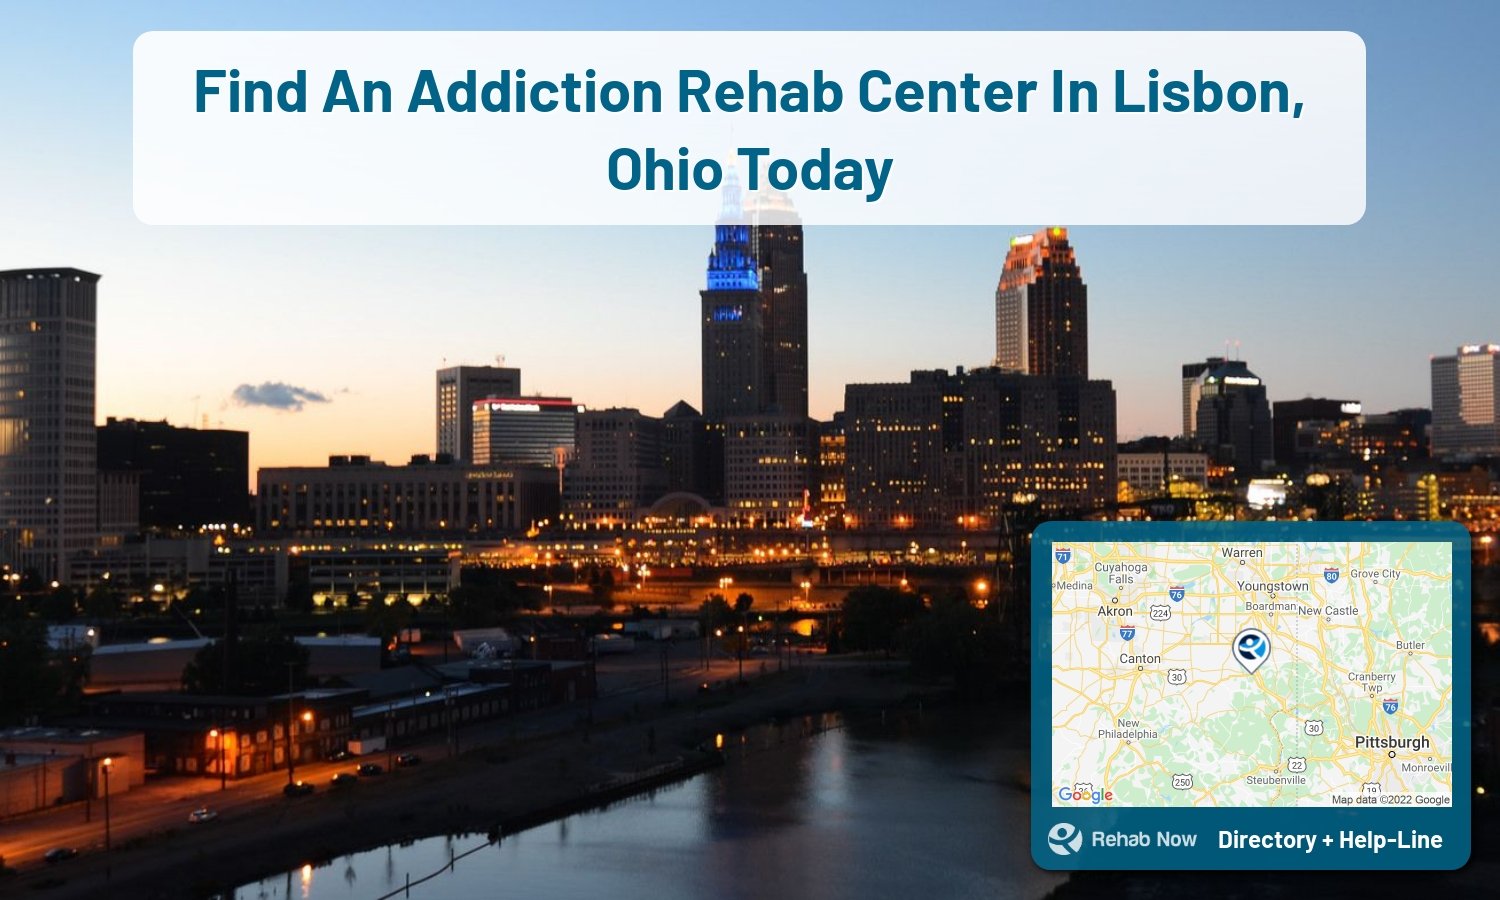 View options, availability, treatment methods, and more, for drug rehab and alcohol treatment in Lisbon, Ohio